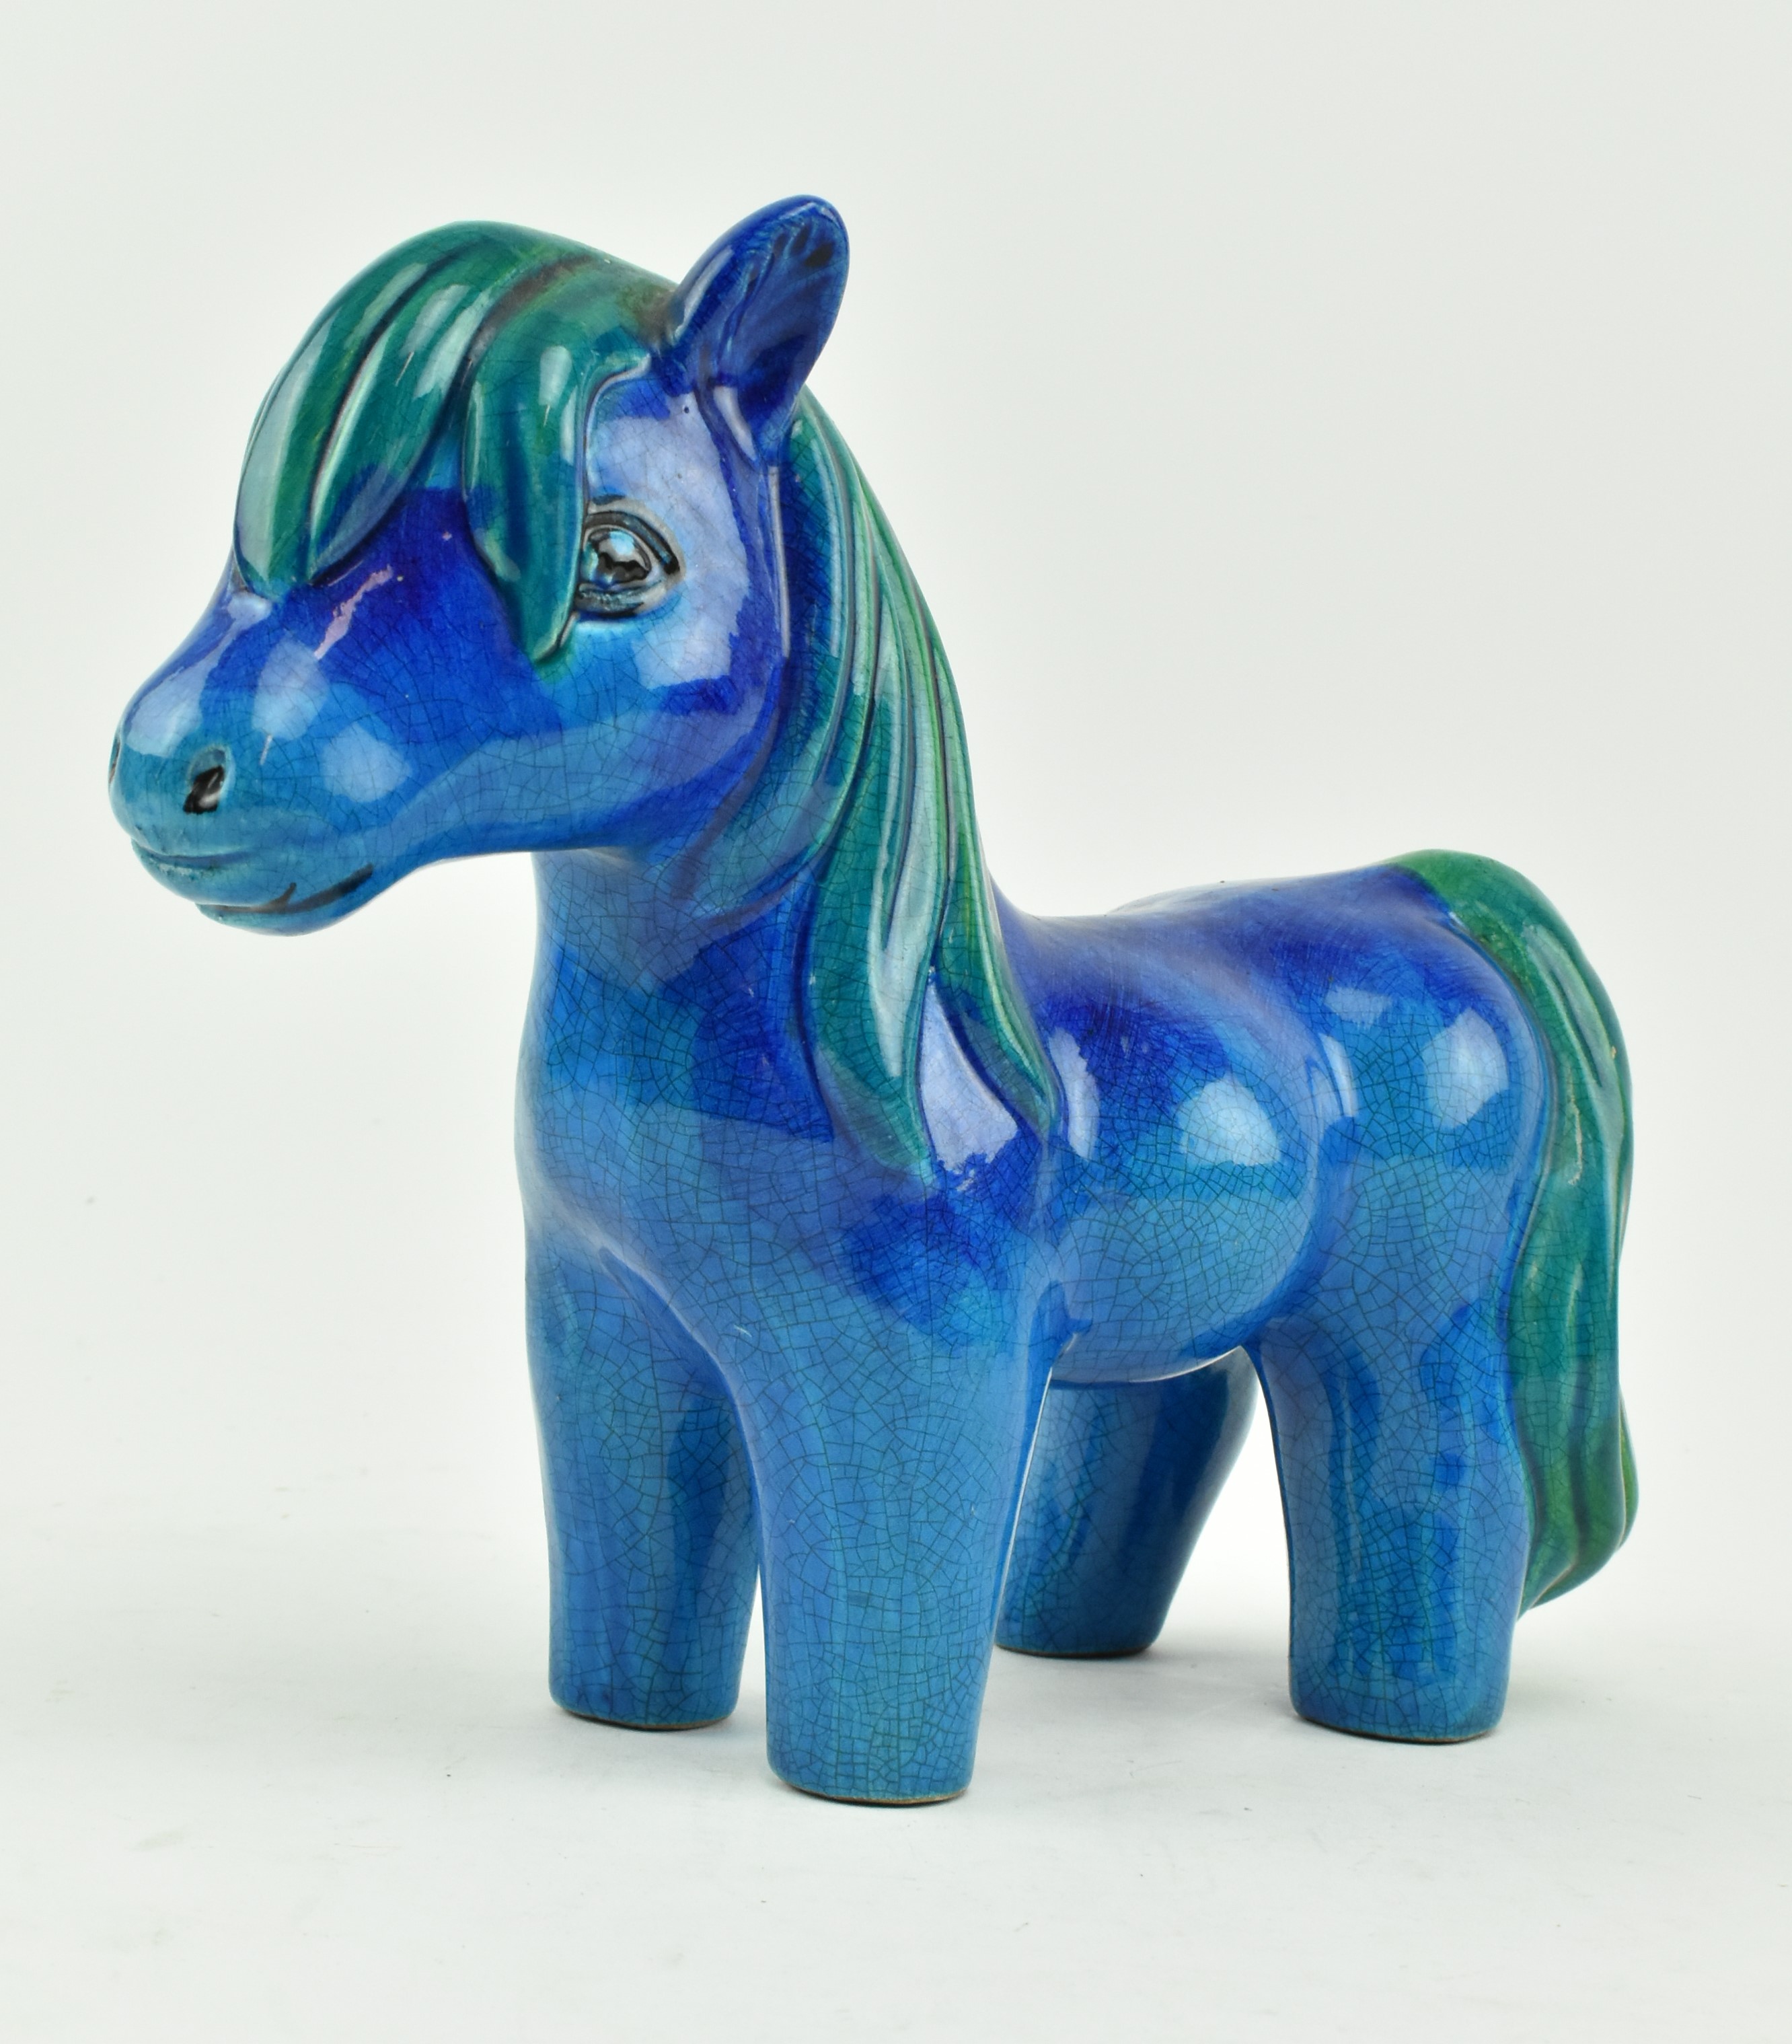 VINTAGE ITALIAN CERAMIC HORSE IN THE STYLE OF BITOSSI - Image 3 of 6